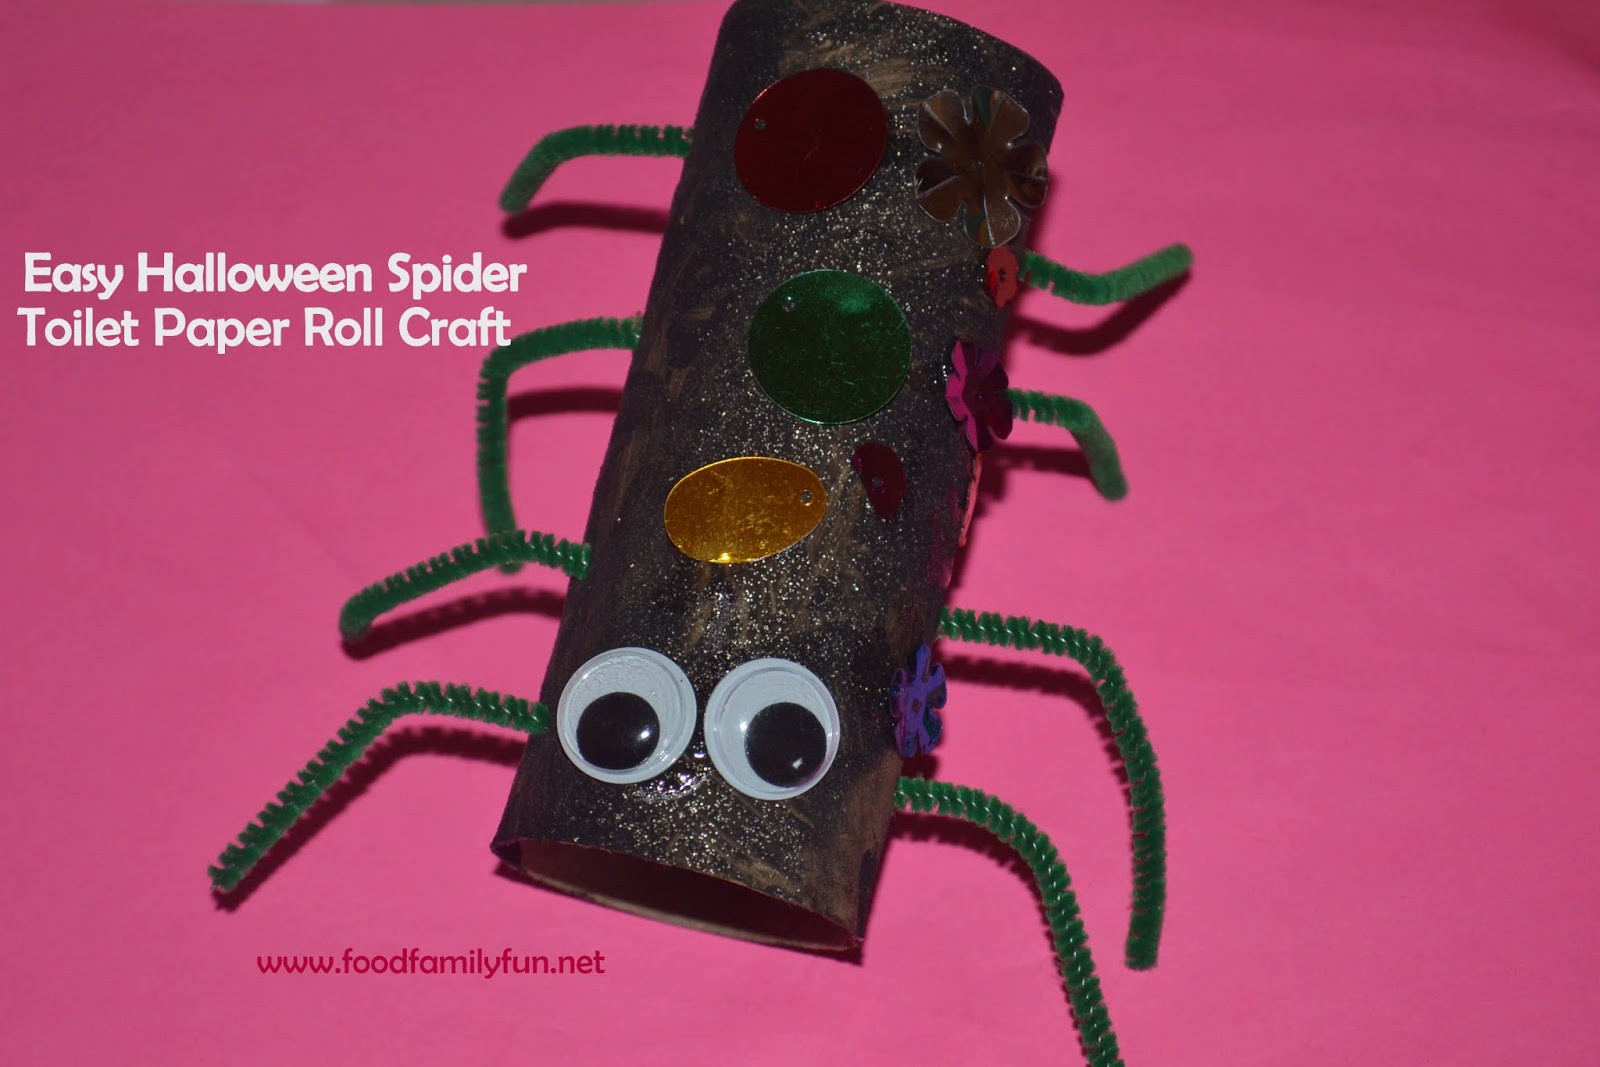 Toilet Paper Roll Halloween Craft
 Food Family Fun Halloween Toilet Paper Roll Spider Craft